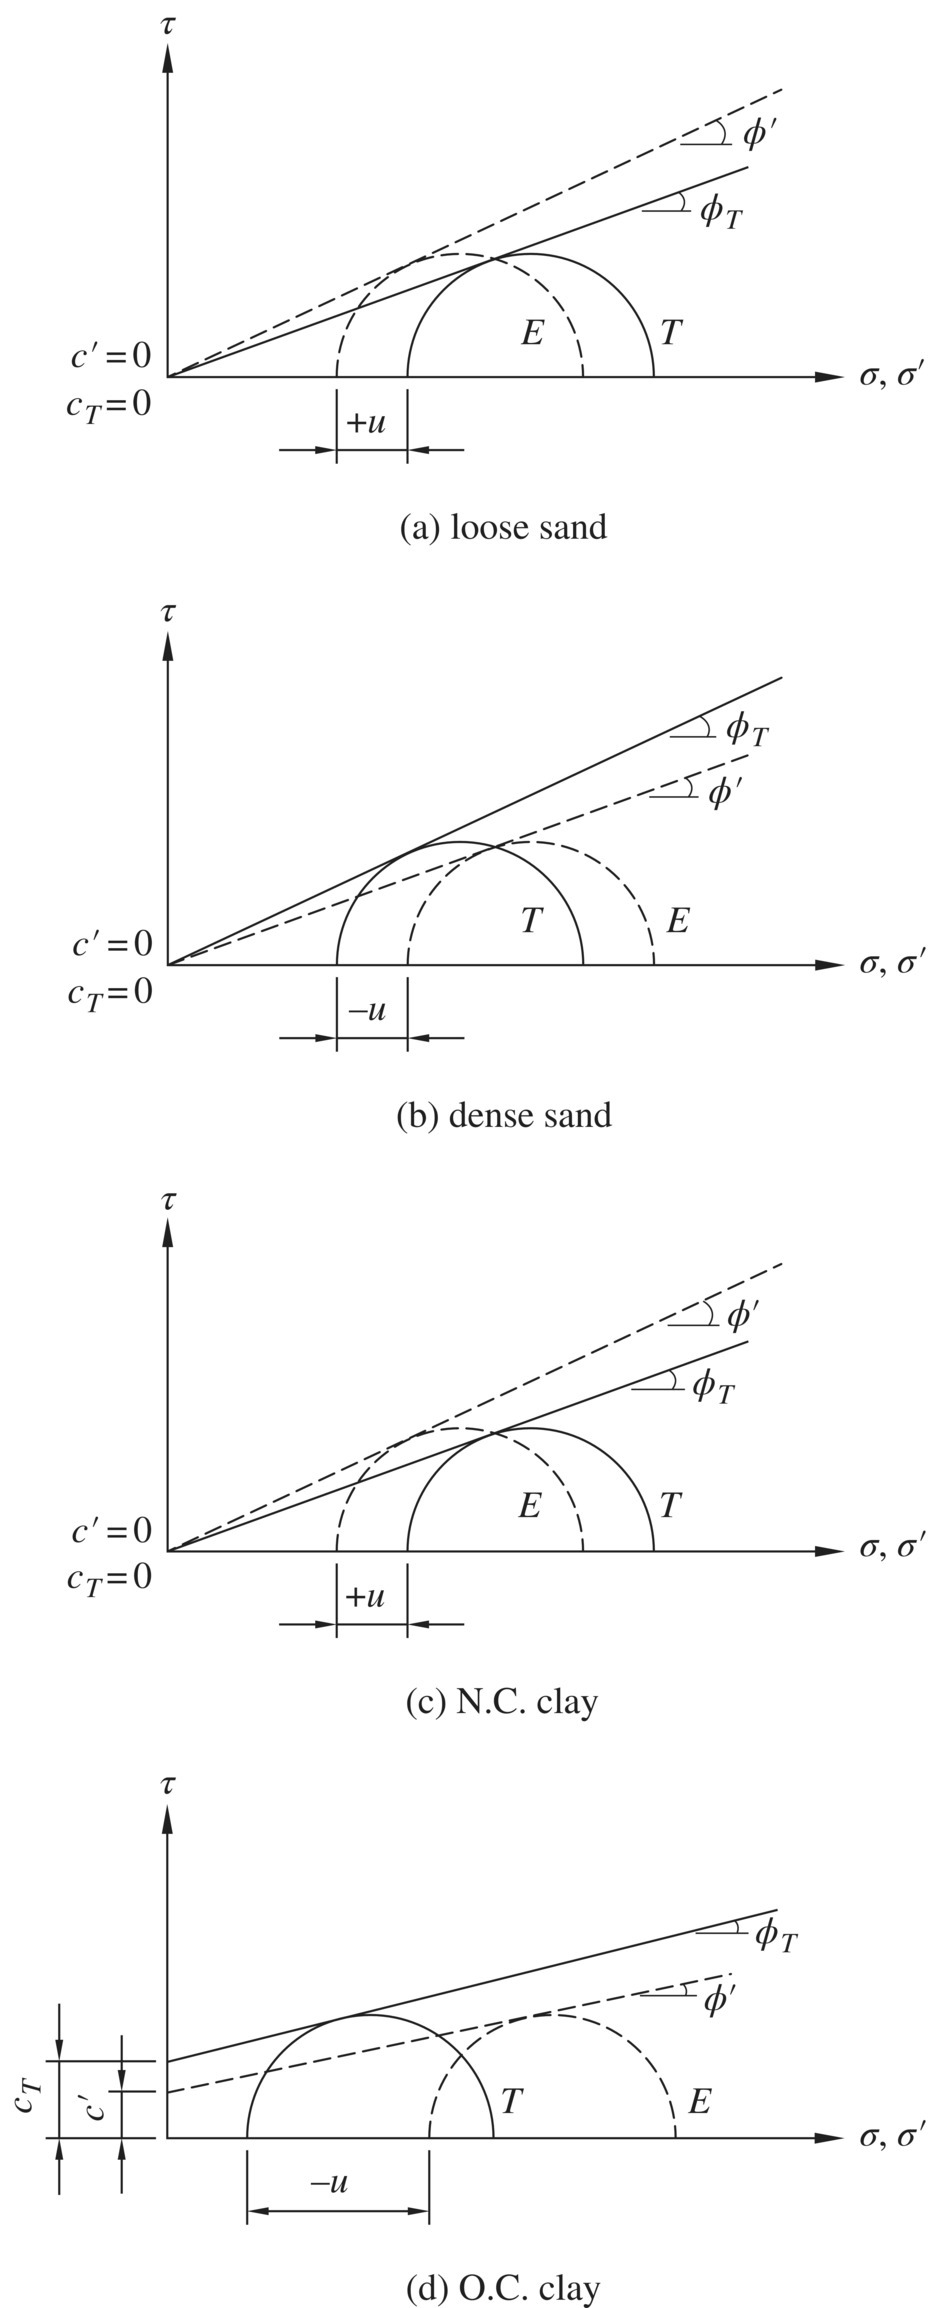 4 Graphs of τ vs. σ, σ’ depicting idealized failure envelopes of loose sand (a), dense sand (b), normally consolidated clay (c), and overconsolidated clay (d).